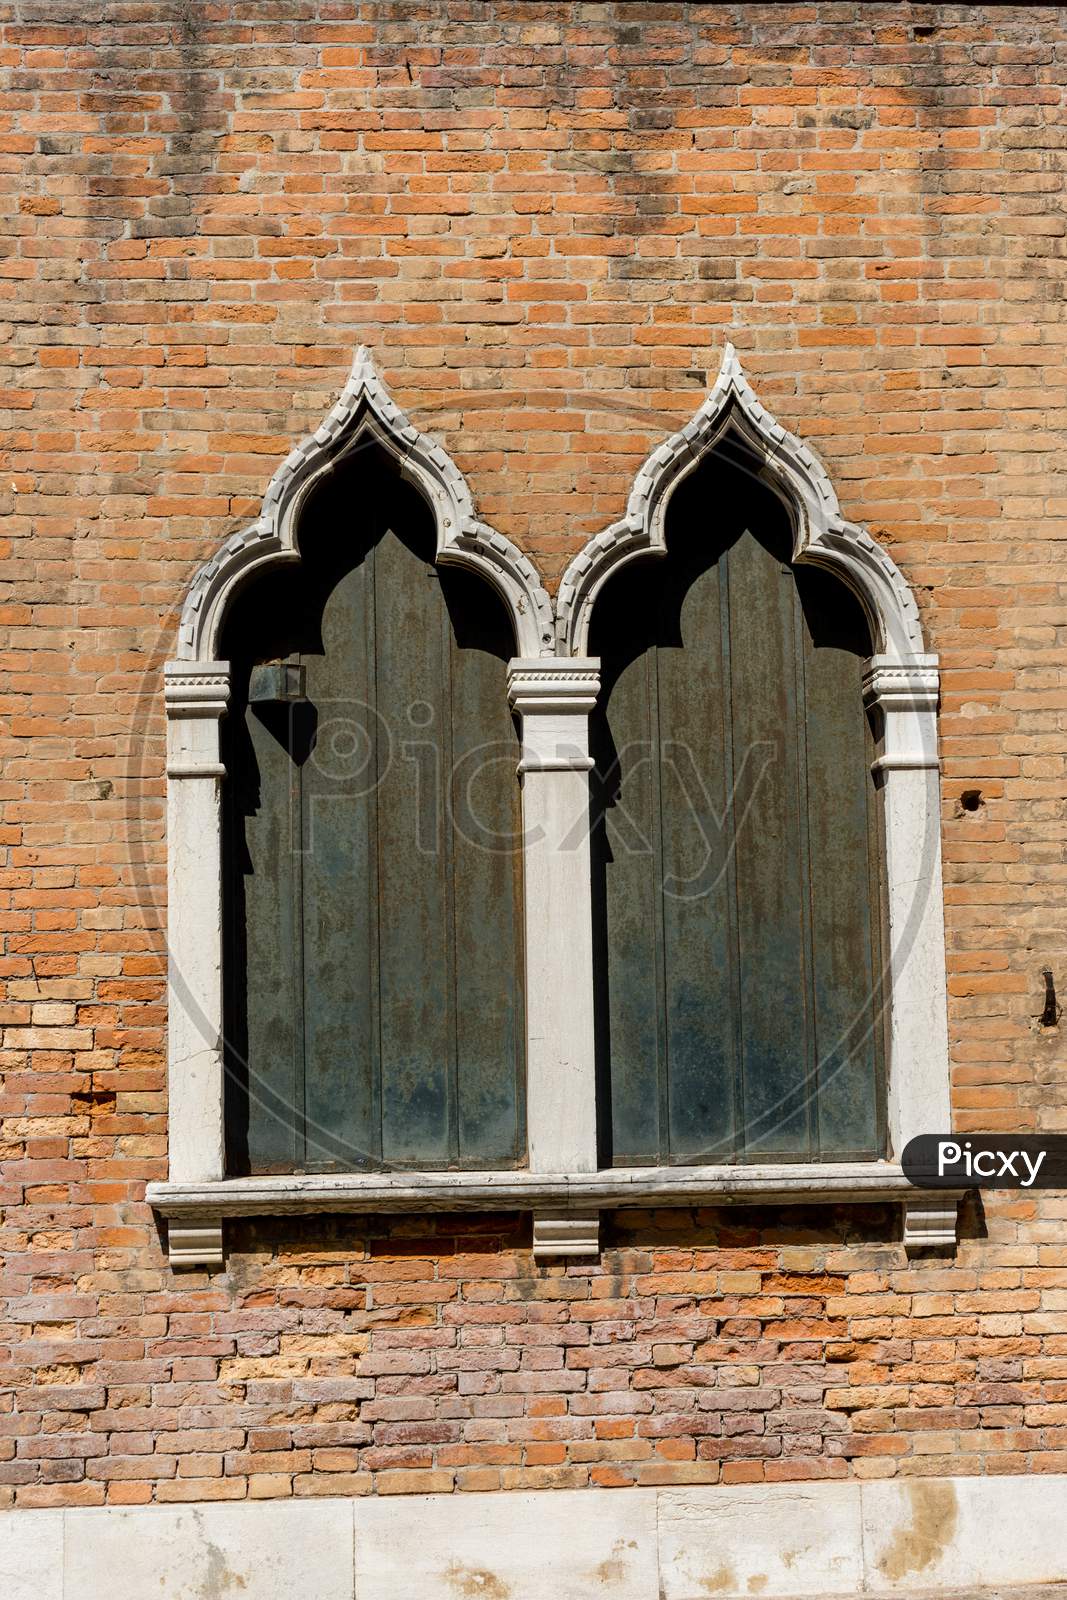 Italy, Venice, A Large Brick Building With Many Windows